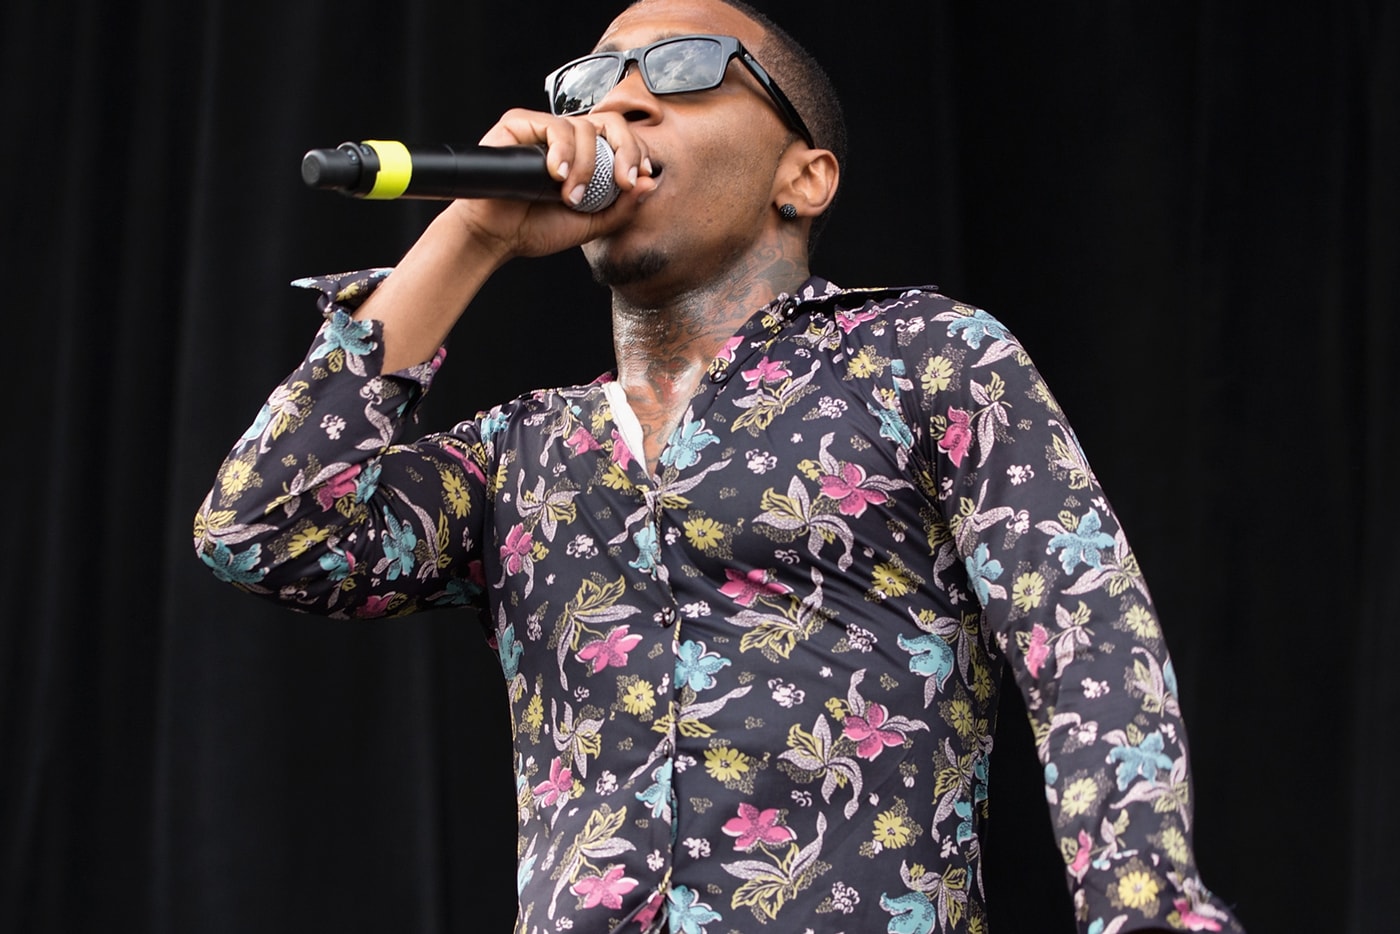 Lil B Will Lecture at University of Florida Next Week